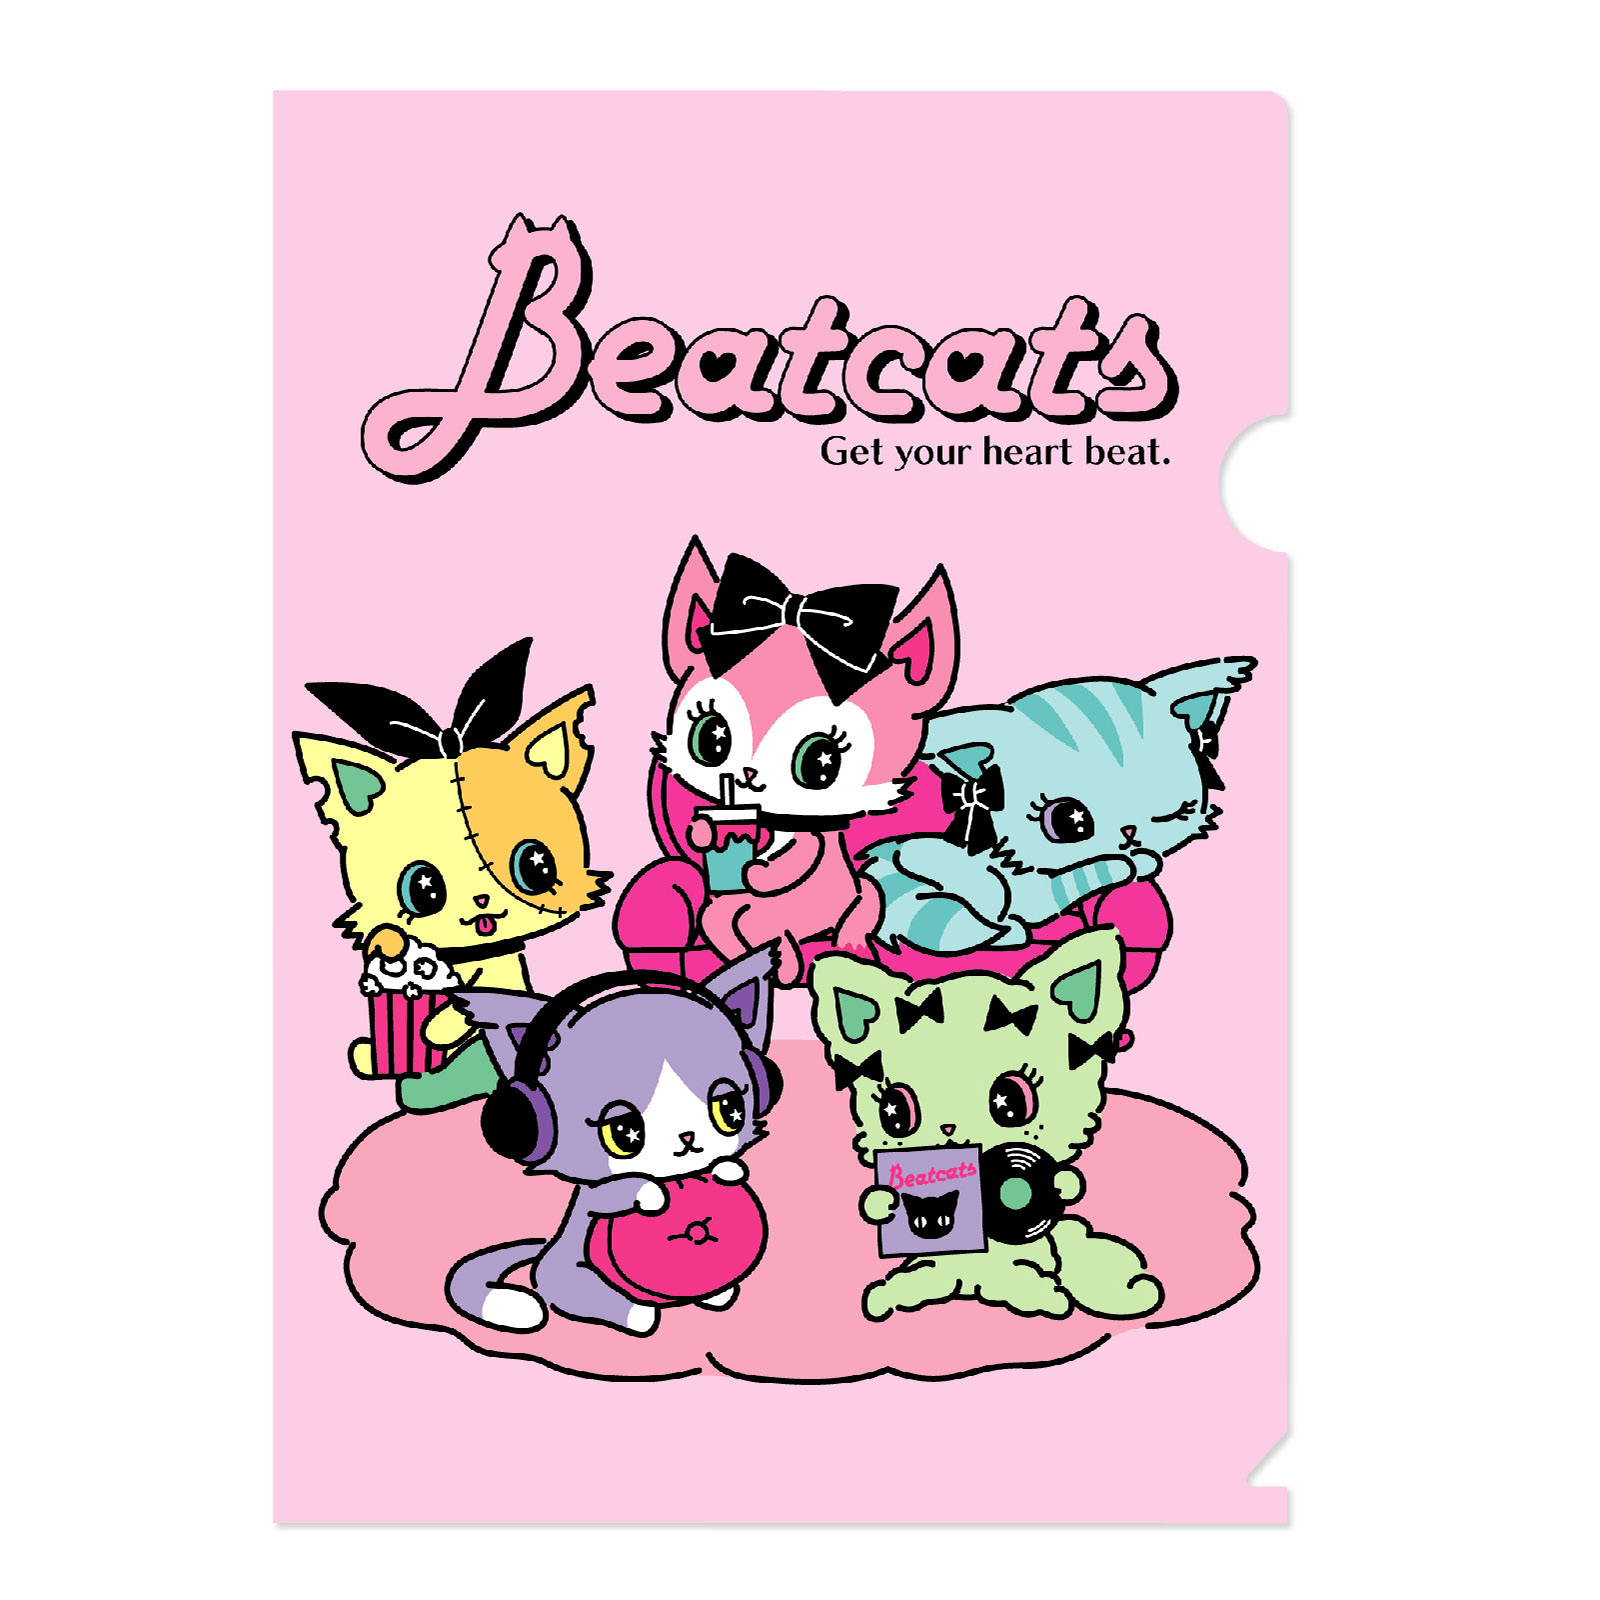 Beatcatsクリアファイル 商品画像02